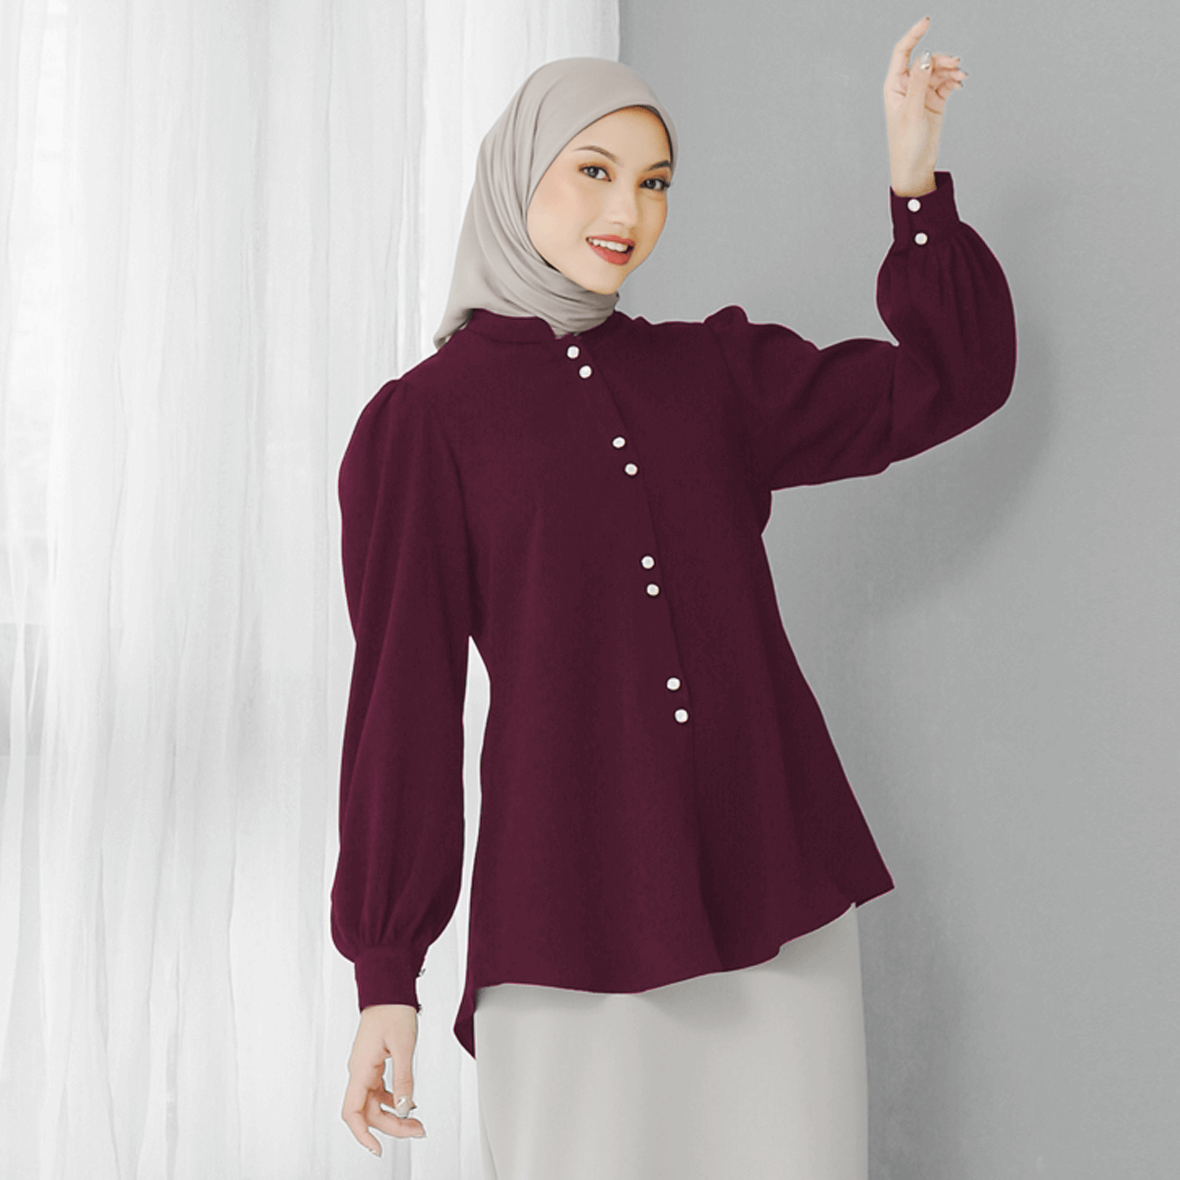 TIFFANY SHIRT MAROON  – Femme Outfit